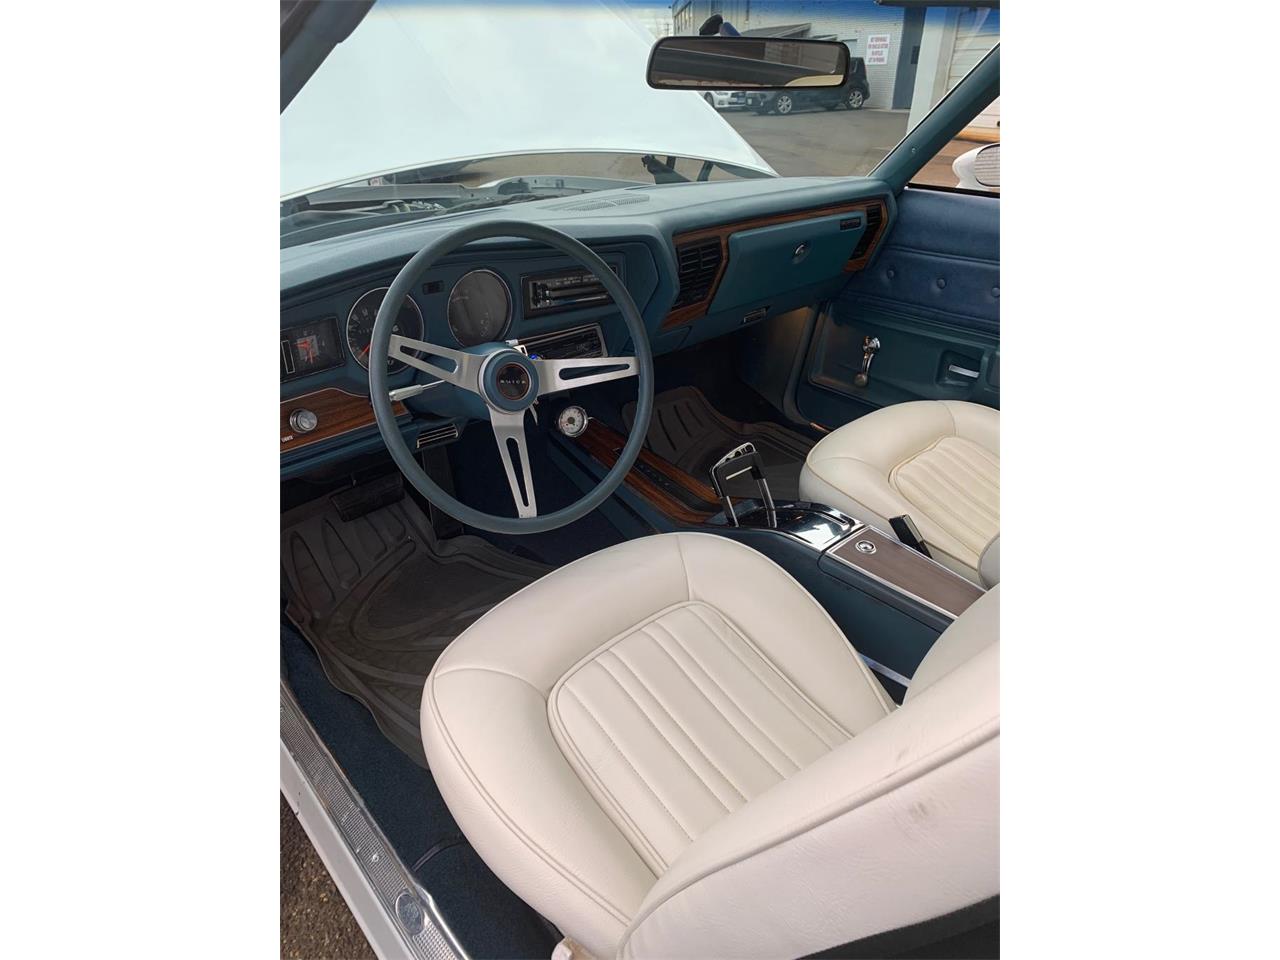 1975 Buick Century for sale in Milford City, CT – photo 28